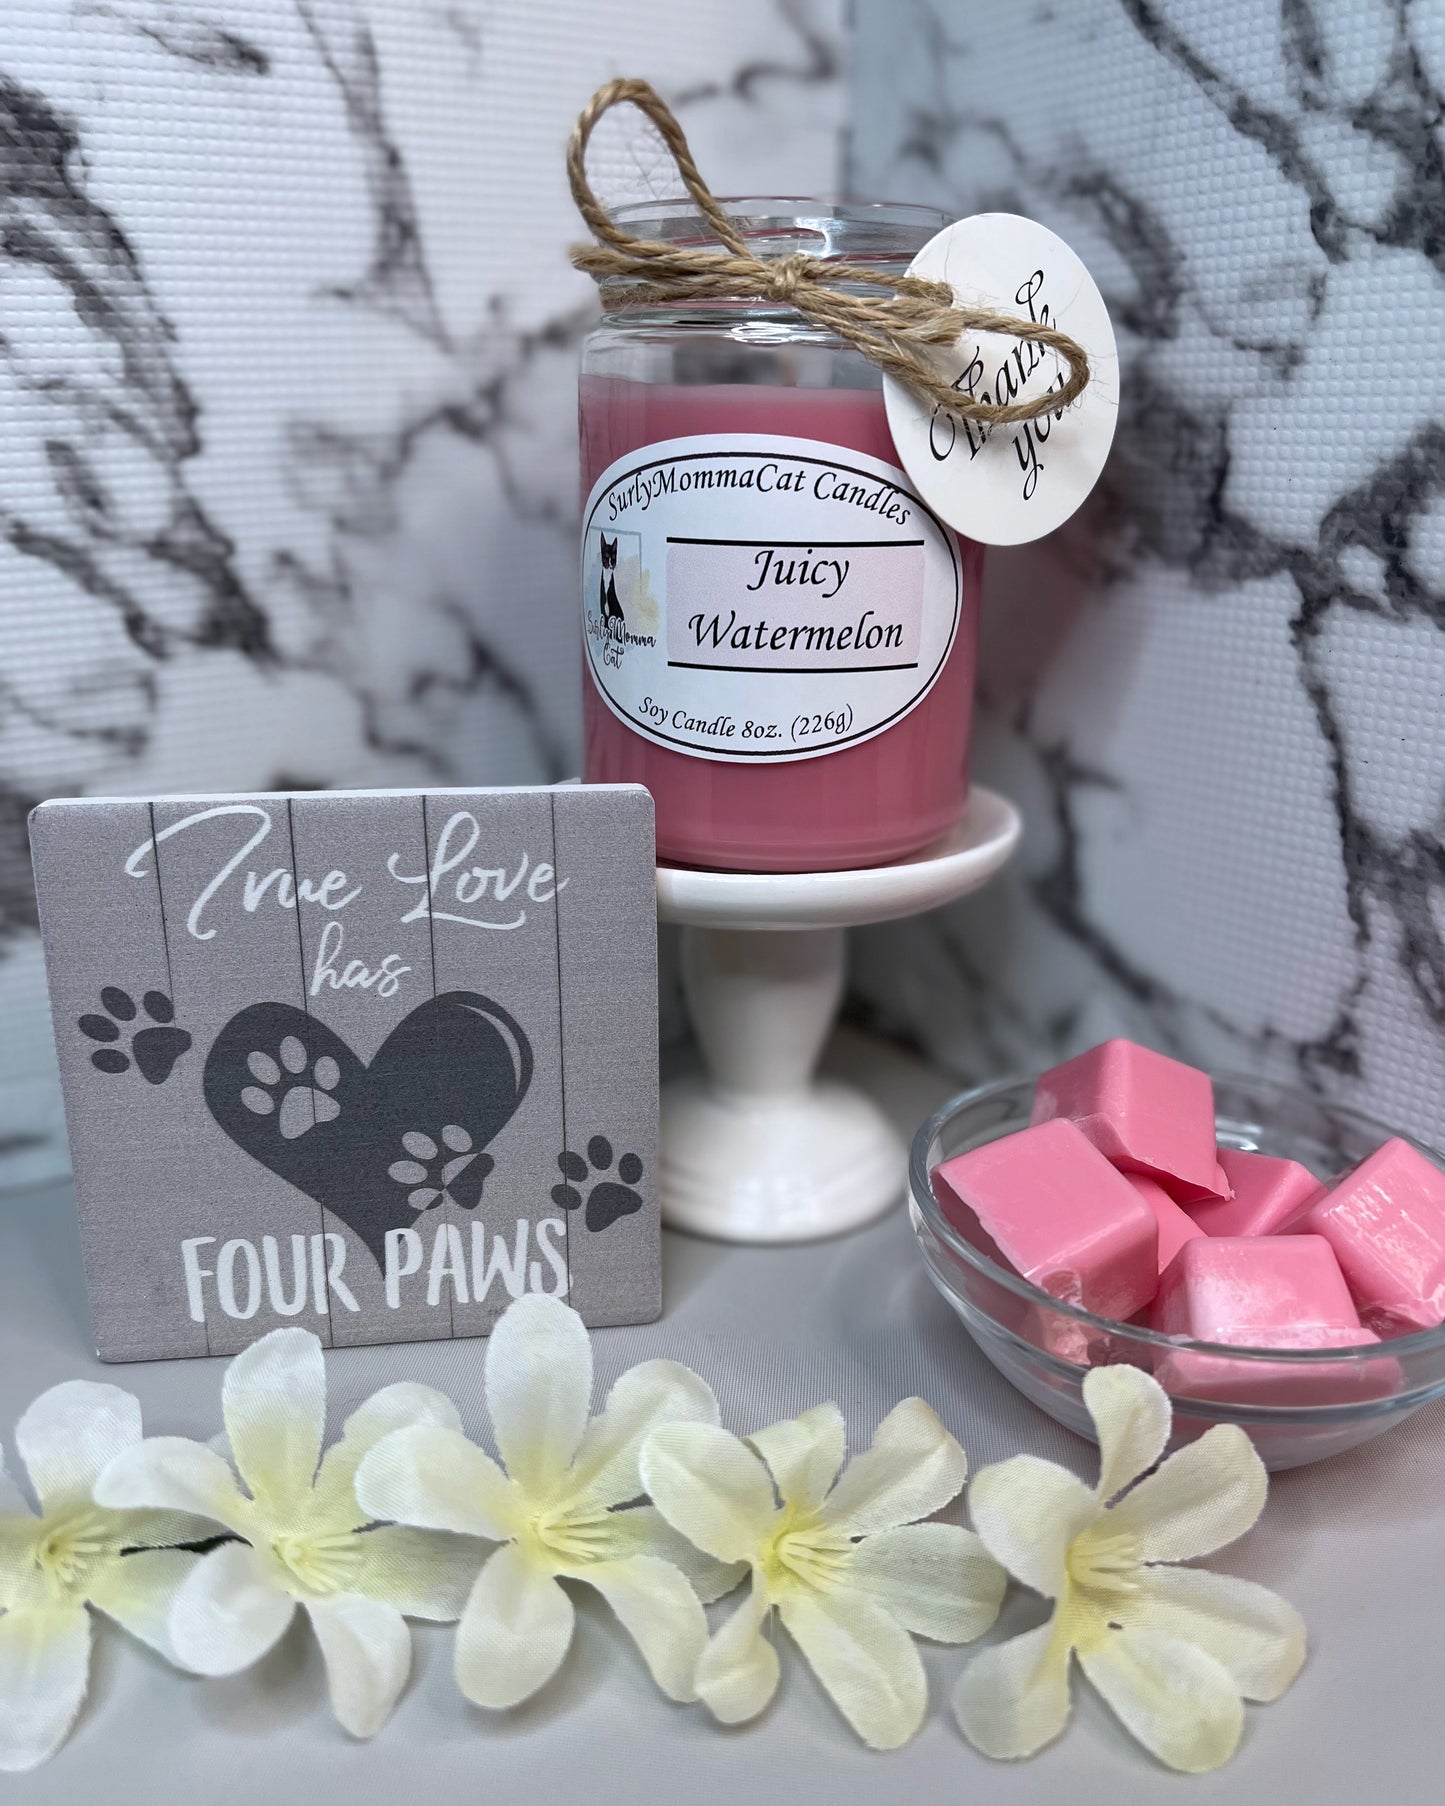 Juicy Watermelon Candles and Wax Melts